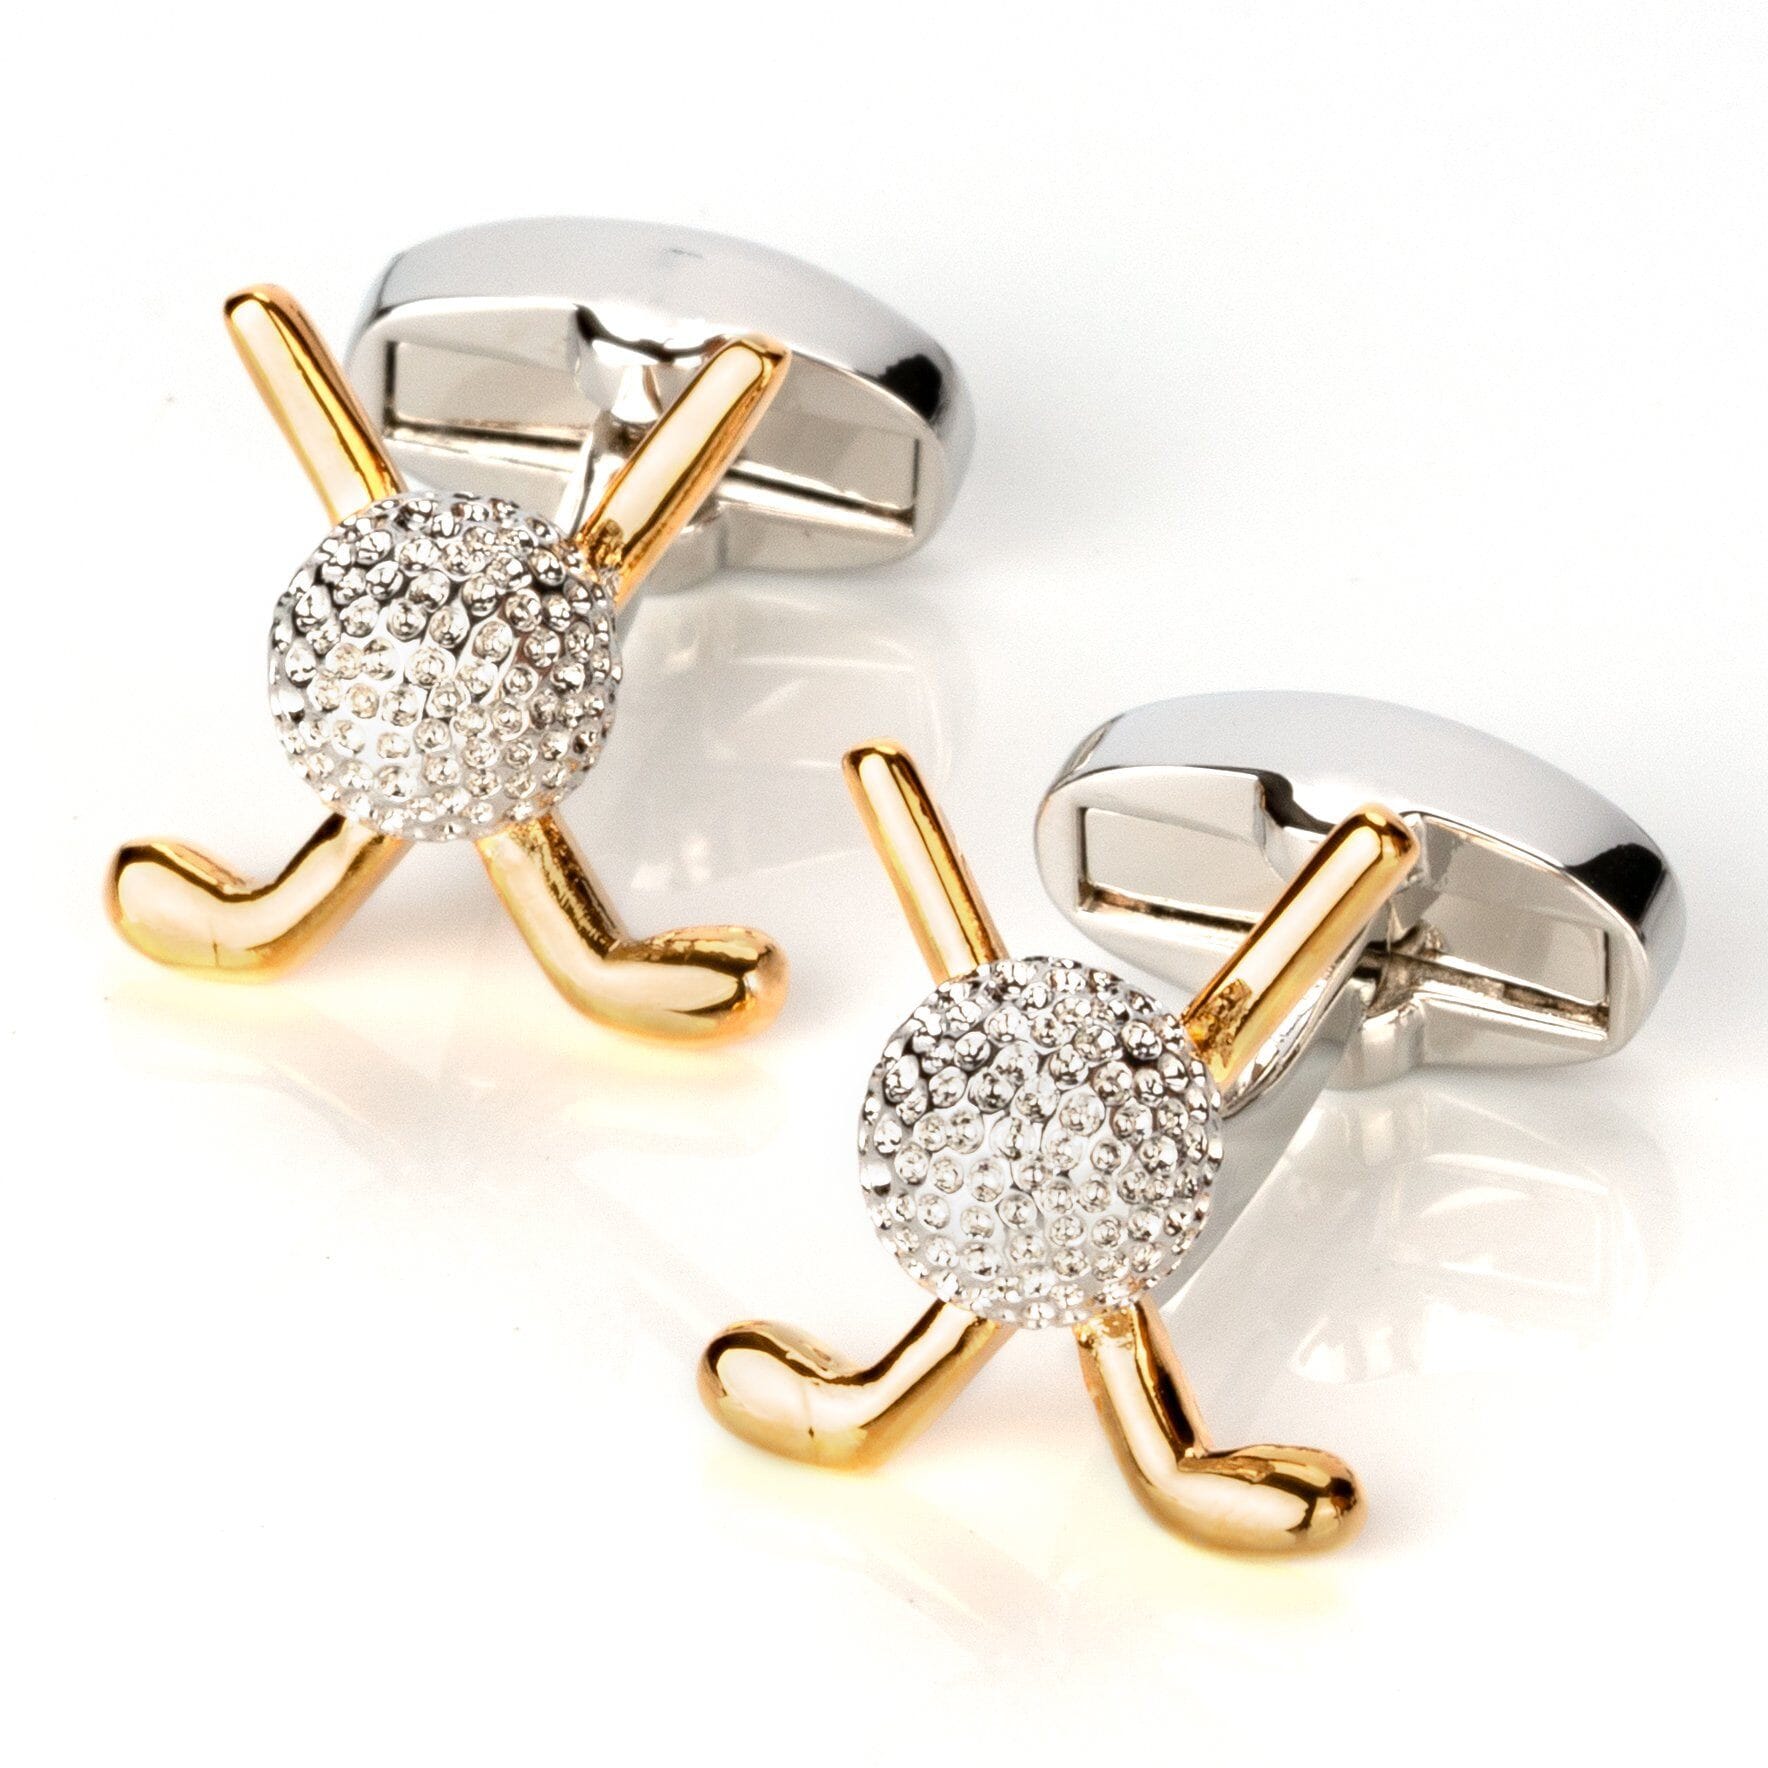 Silver and Gold Golf Club and Ball Cufflinks Novelty Cufflinks Clinks Australia Silver and Gold Golf Club and Ball 